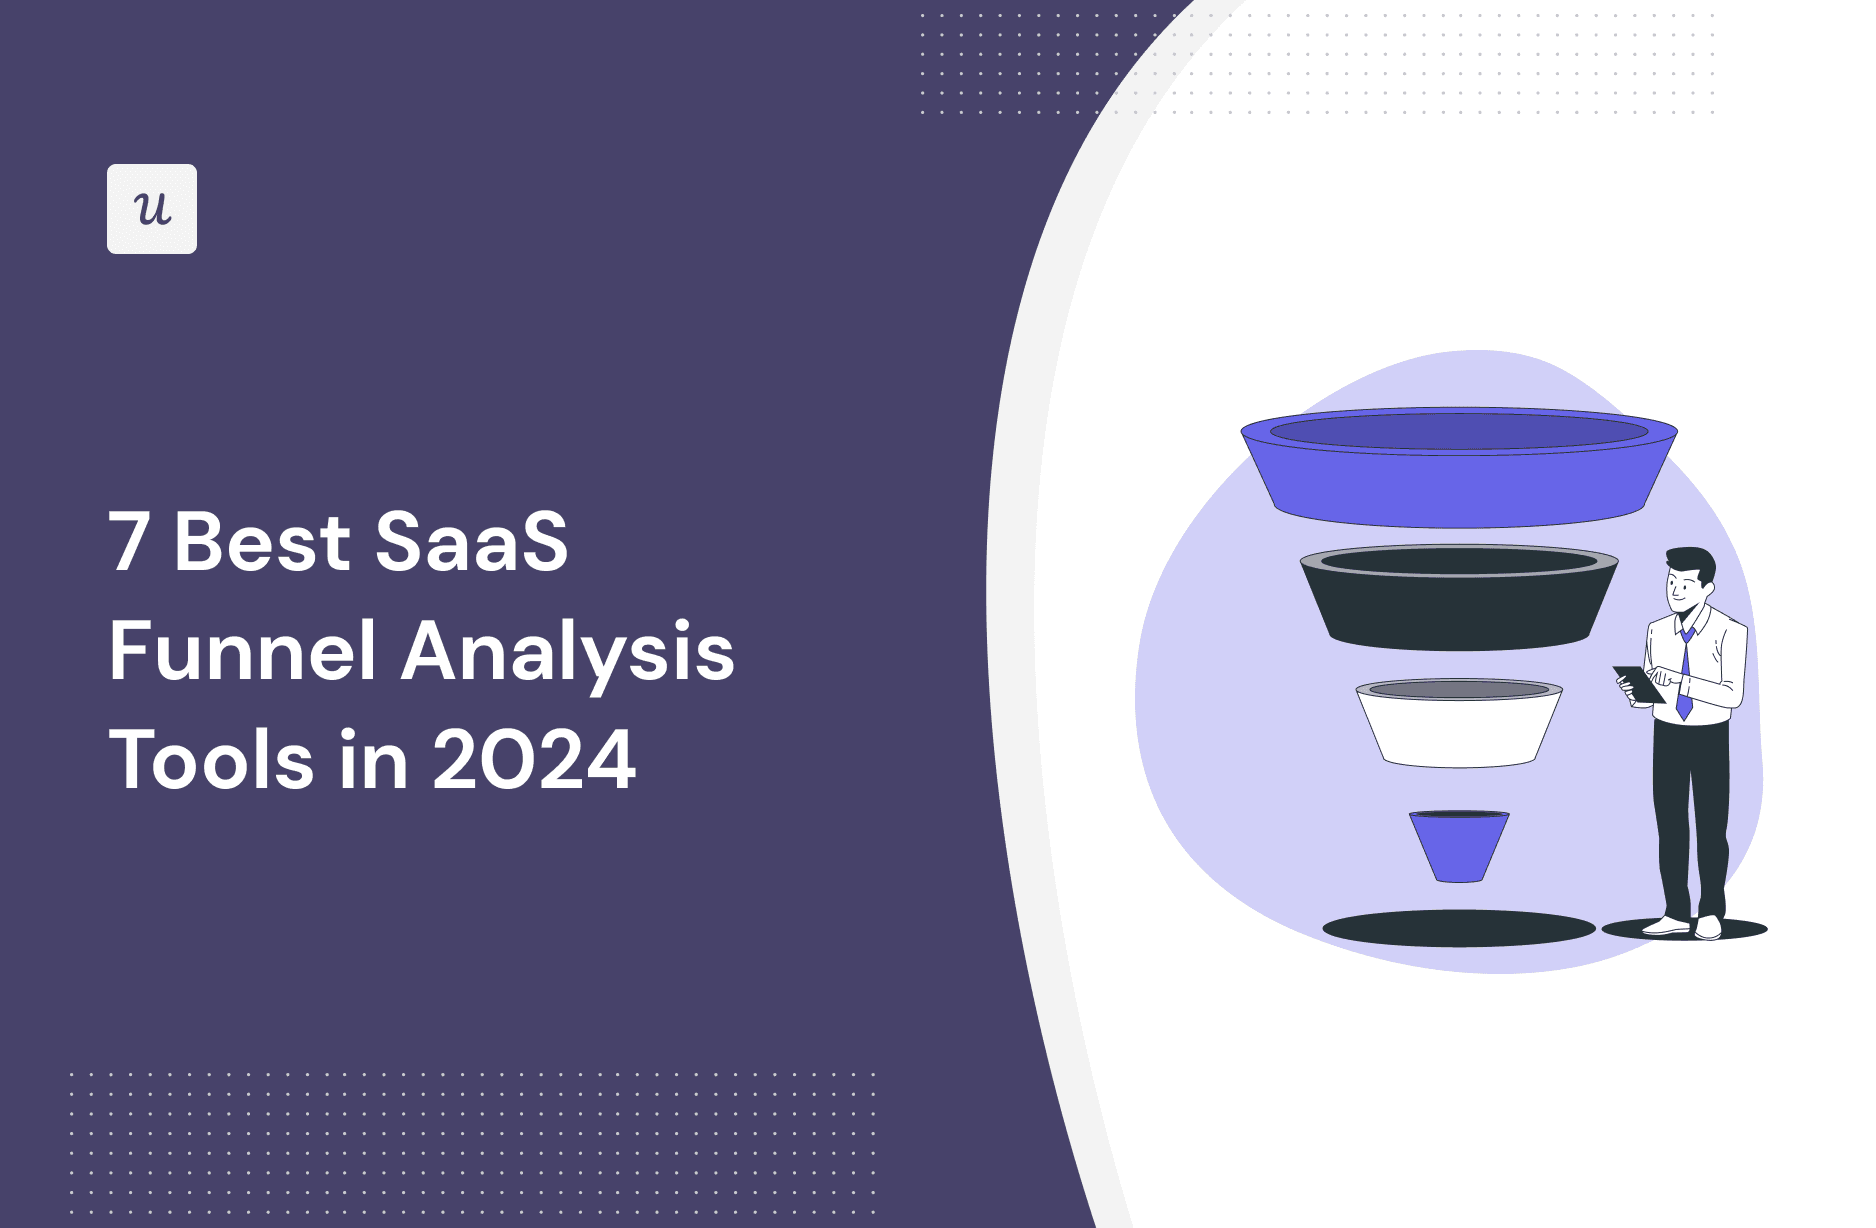 7 Best SaaS Funnel Analysis Tools in 2024 cover